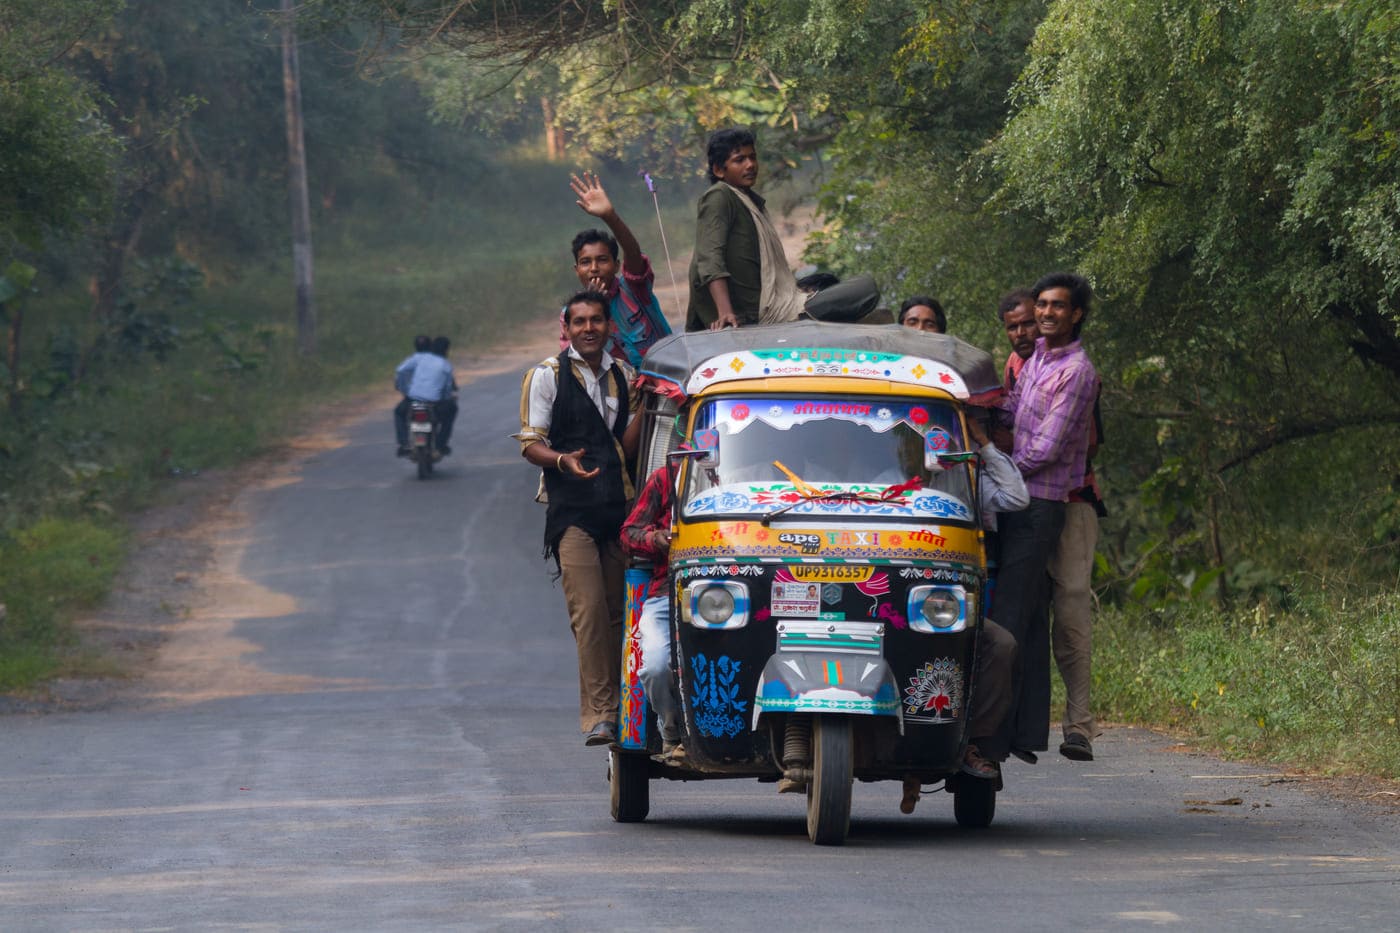 A crowded auto-rickshaw on the street in Orchha 